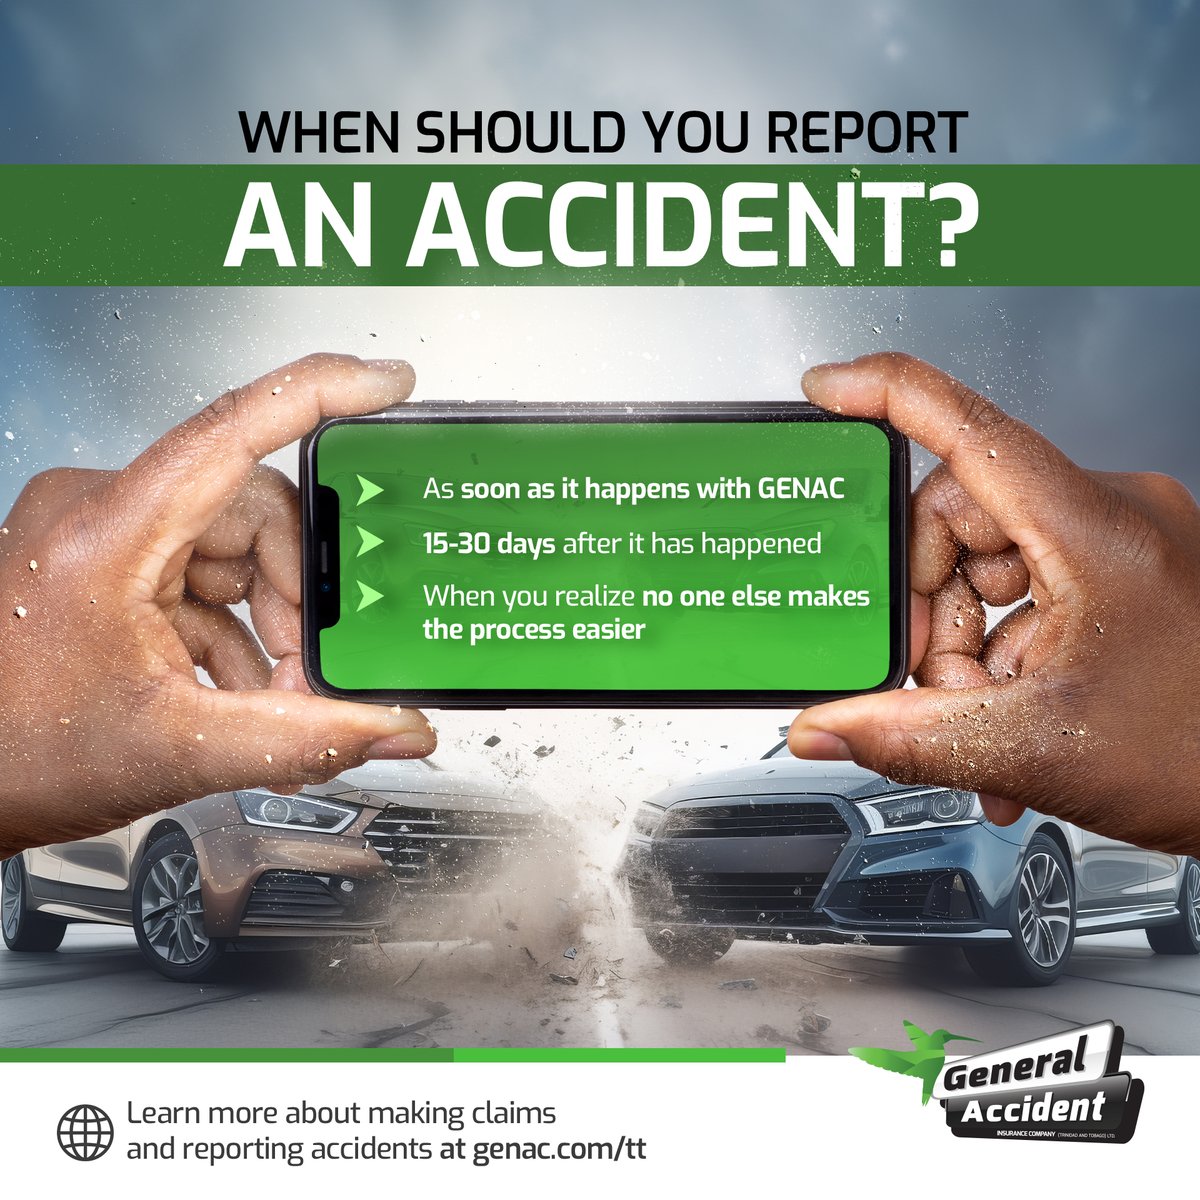 When are you most likely to report an accident? Tell us in the comments!
#GenacTT #Trinidad #Insurance #BackUpPlan #AccidentReports